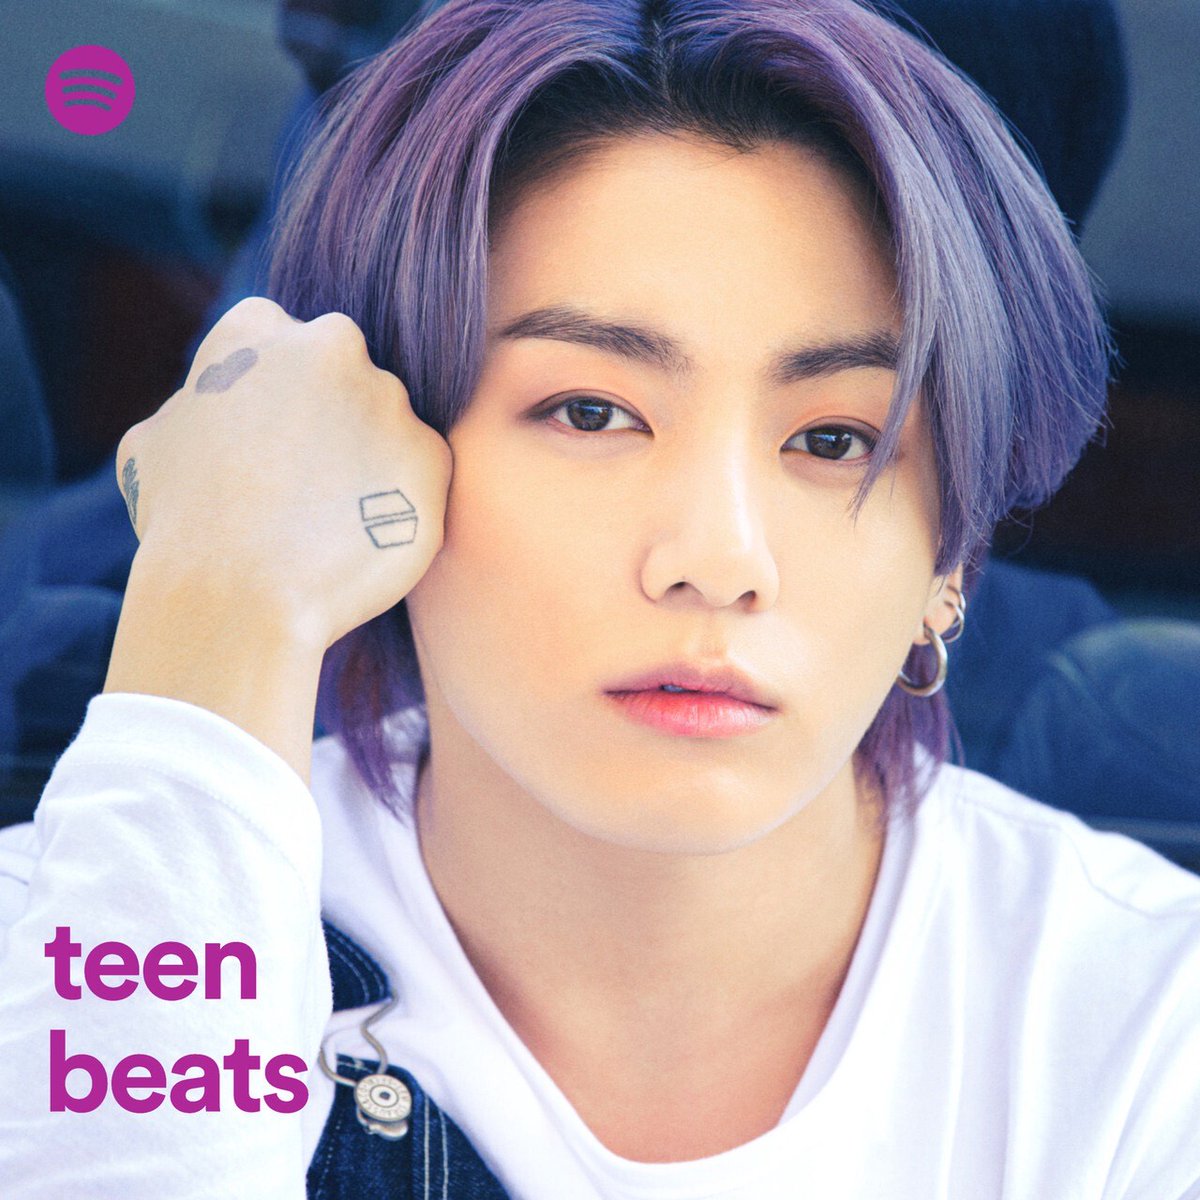 Listen to Jung Kook's original soundtrack 'Stay Alive (Prod. SUGA of BTS)' for #7FATES_CHAKHO right here on @Spotify's #TeenBeats playlist.

🎧 open.spotify.com/playlist/37i9d…

#방탄소년단 #BTS #슈가 #SUGA #정국 #JungKook #StayAlive_CHAKHO